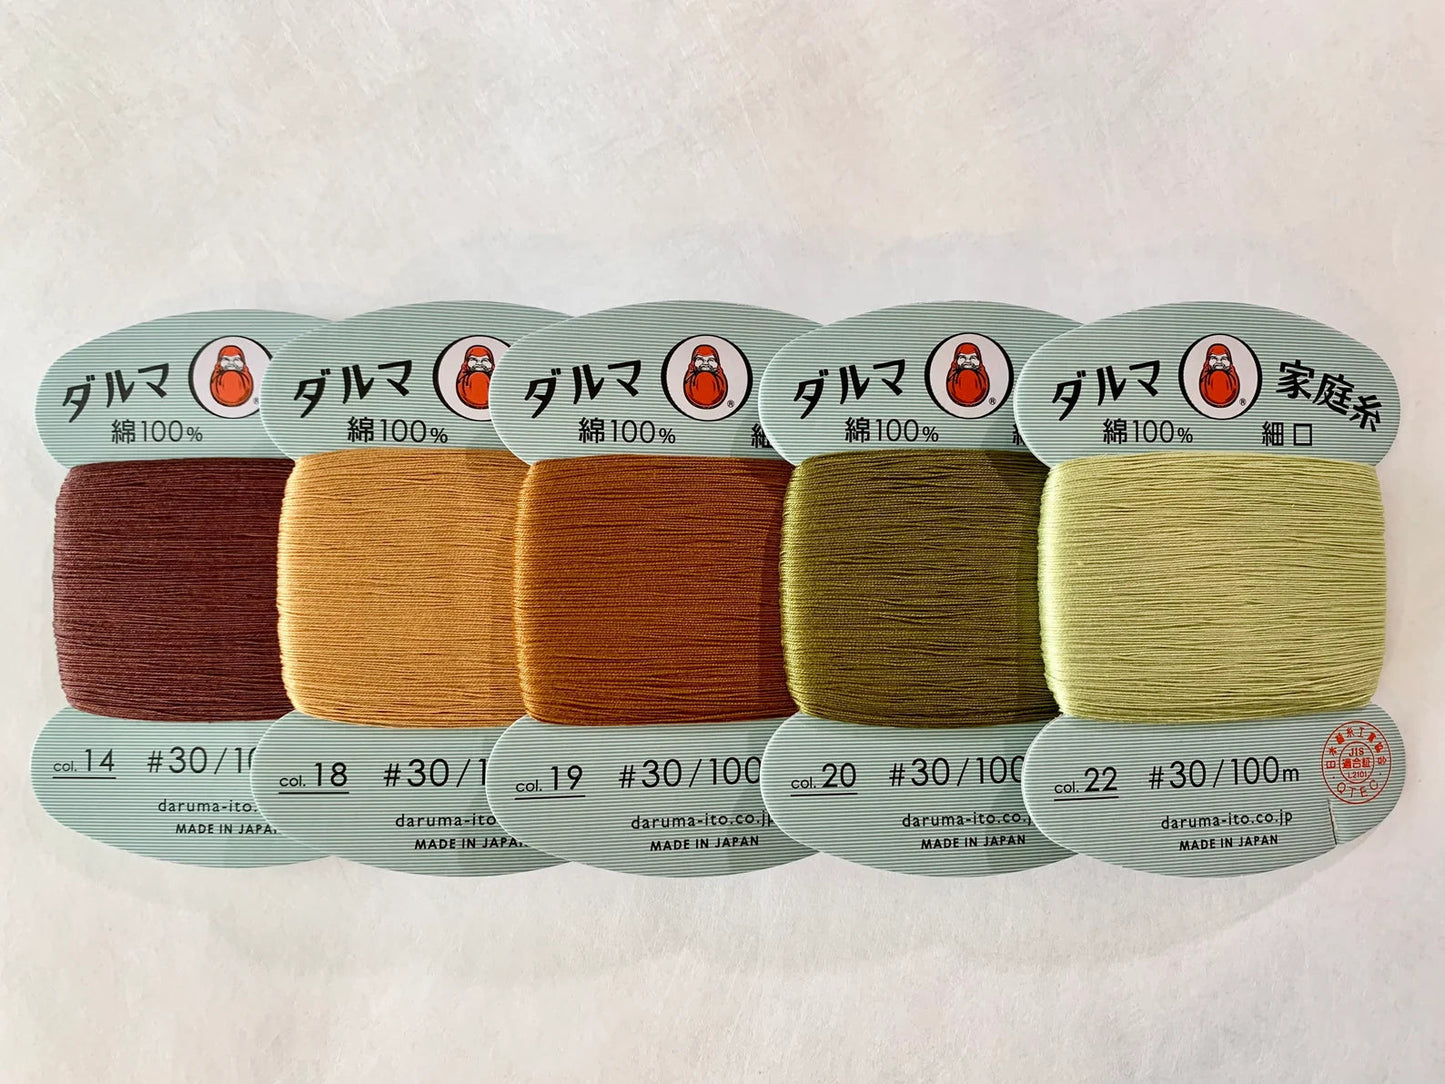 Daruma Home Thread Color #18 Camel らくだ Brown Hand Sewing Thread Japanese Cotton 100 meter skein size #30